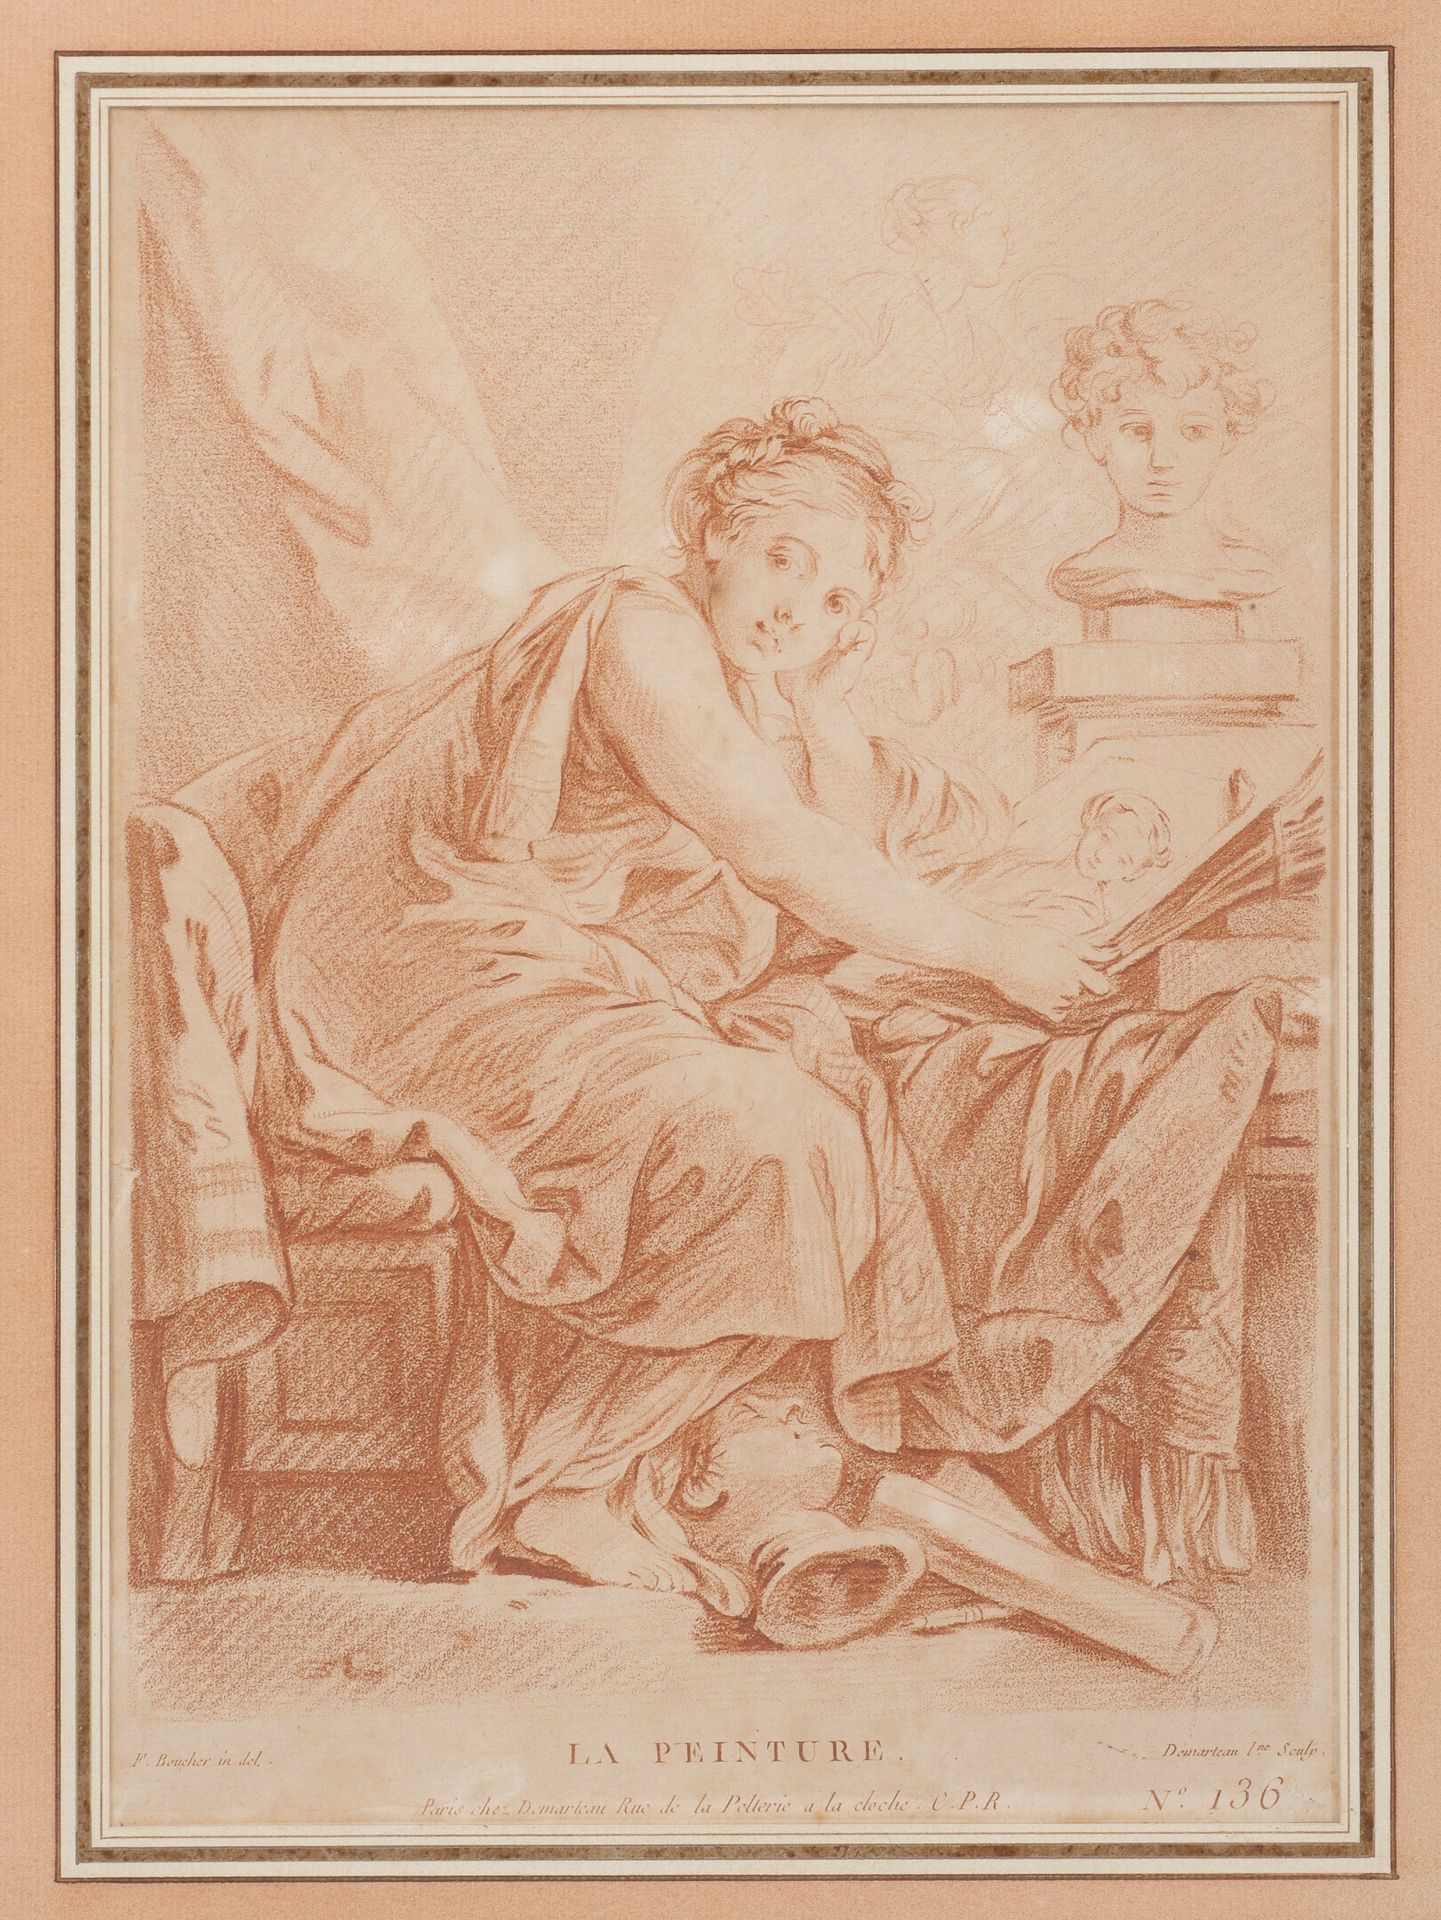 D'après François BOUCHER (1703-1770) Painting.

Engraving in the manner of the s&hellip;